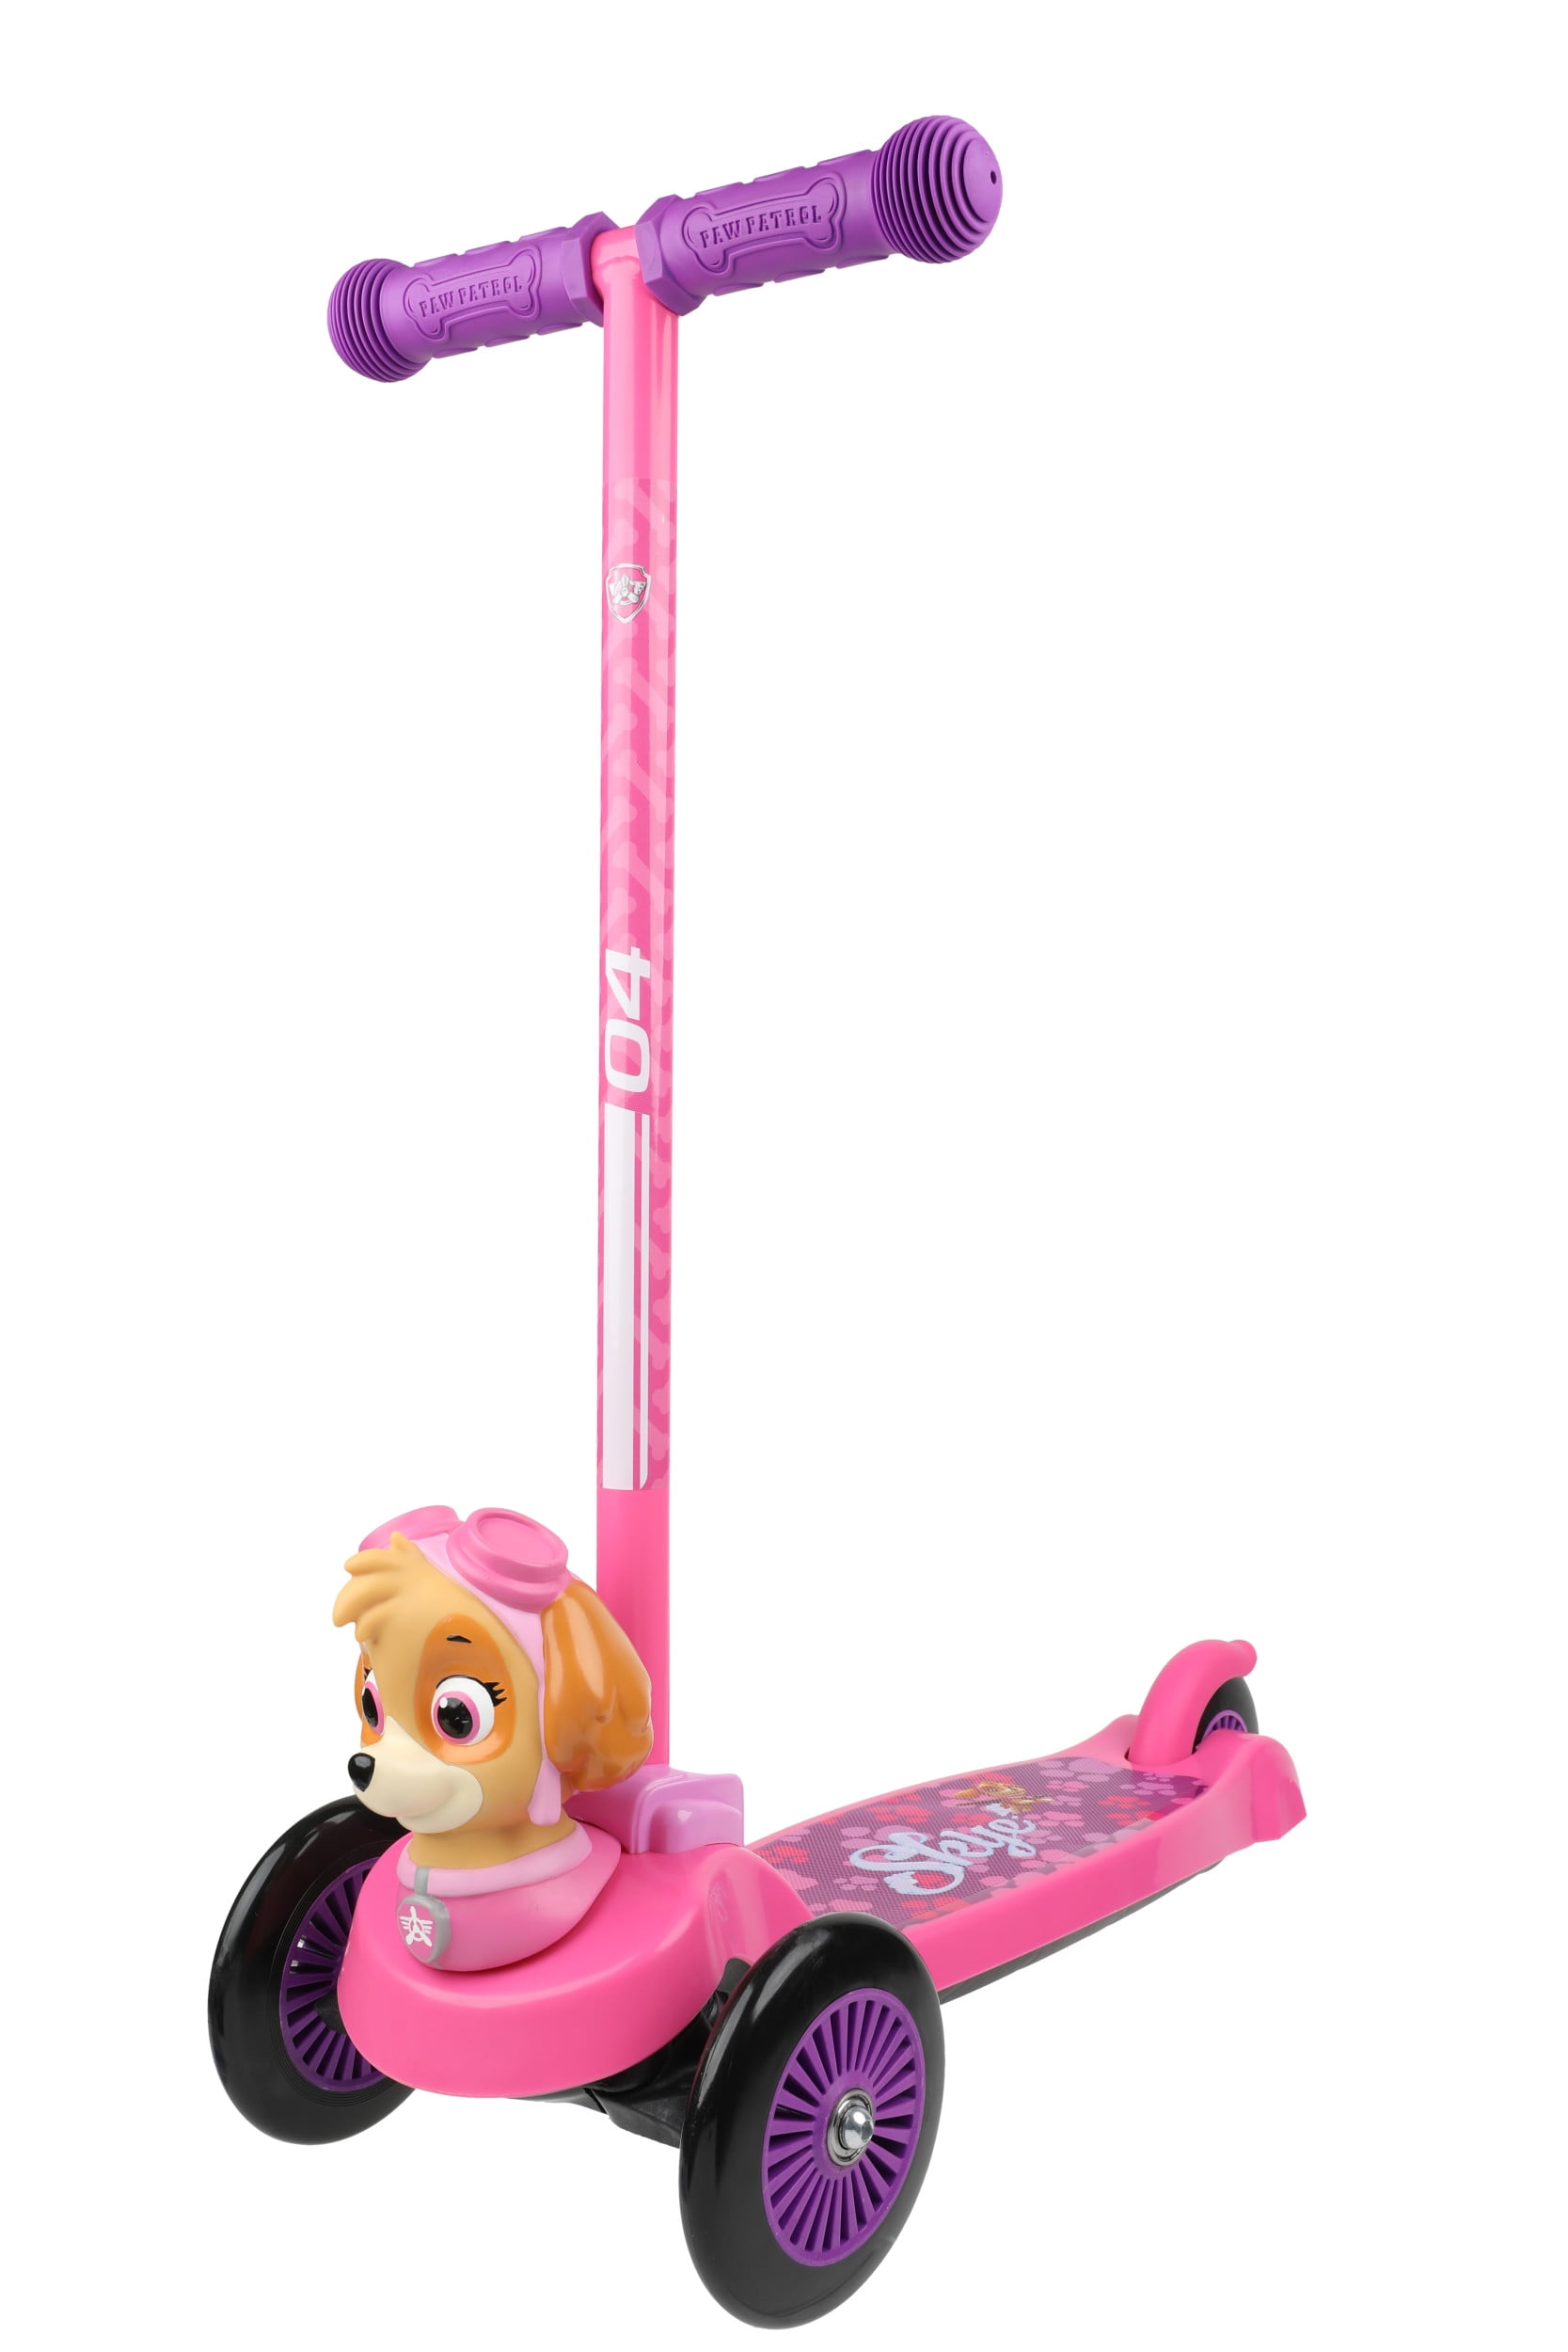 Paw Patrol Paw Patrol Girls 3 Wheel Scooter Pink Kids Activity Outdoor Perfect 